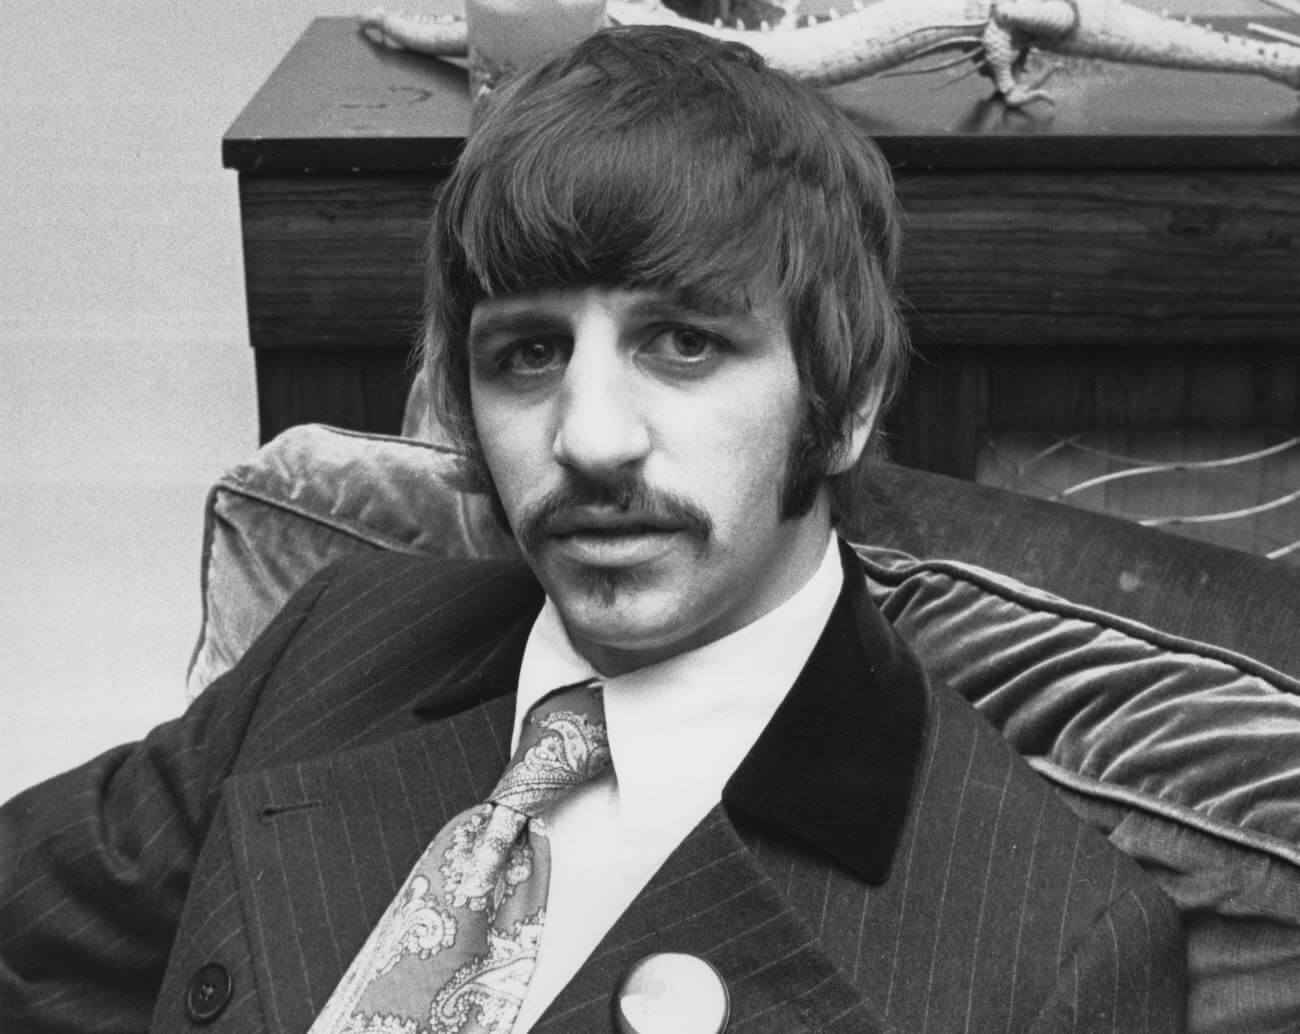 A black and white picture of Ringo Starr wearing a suit and sitting in an armchair.